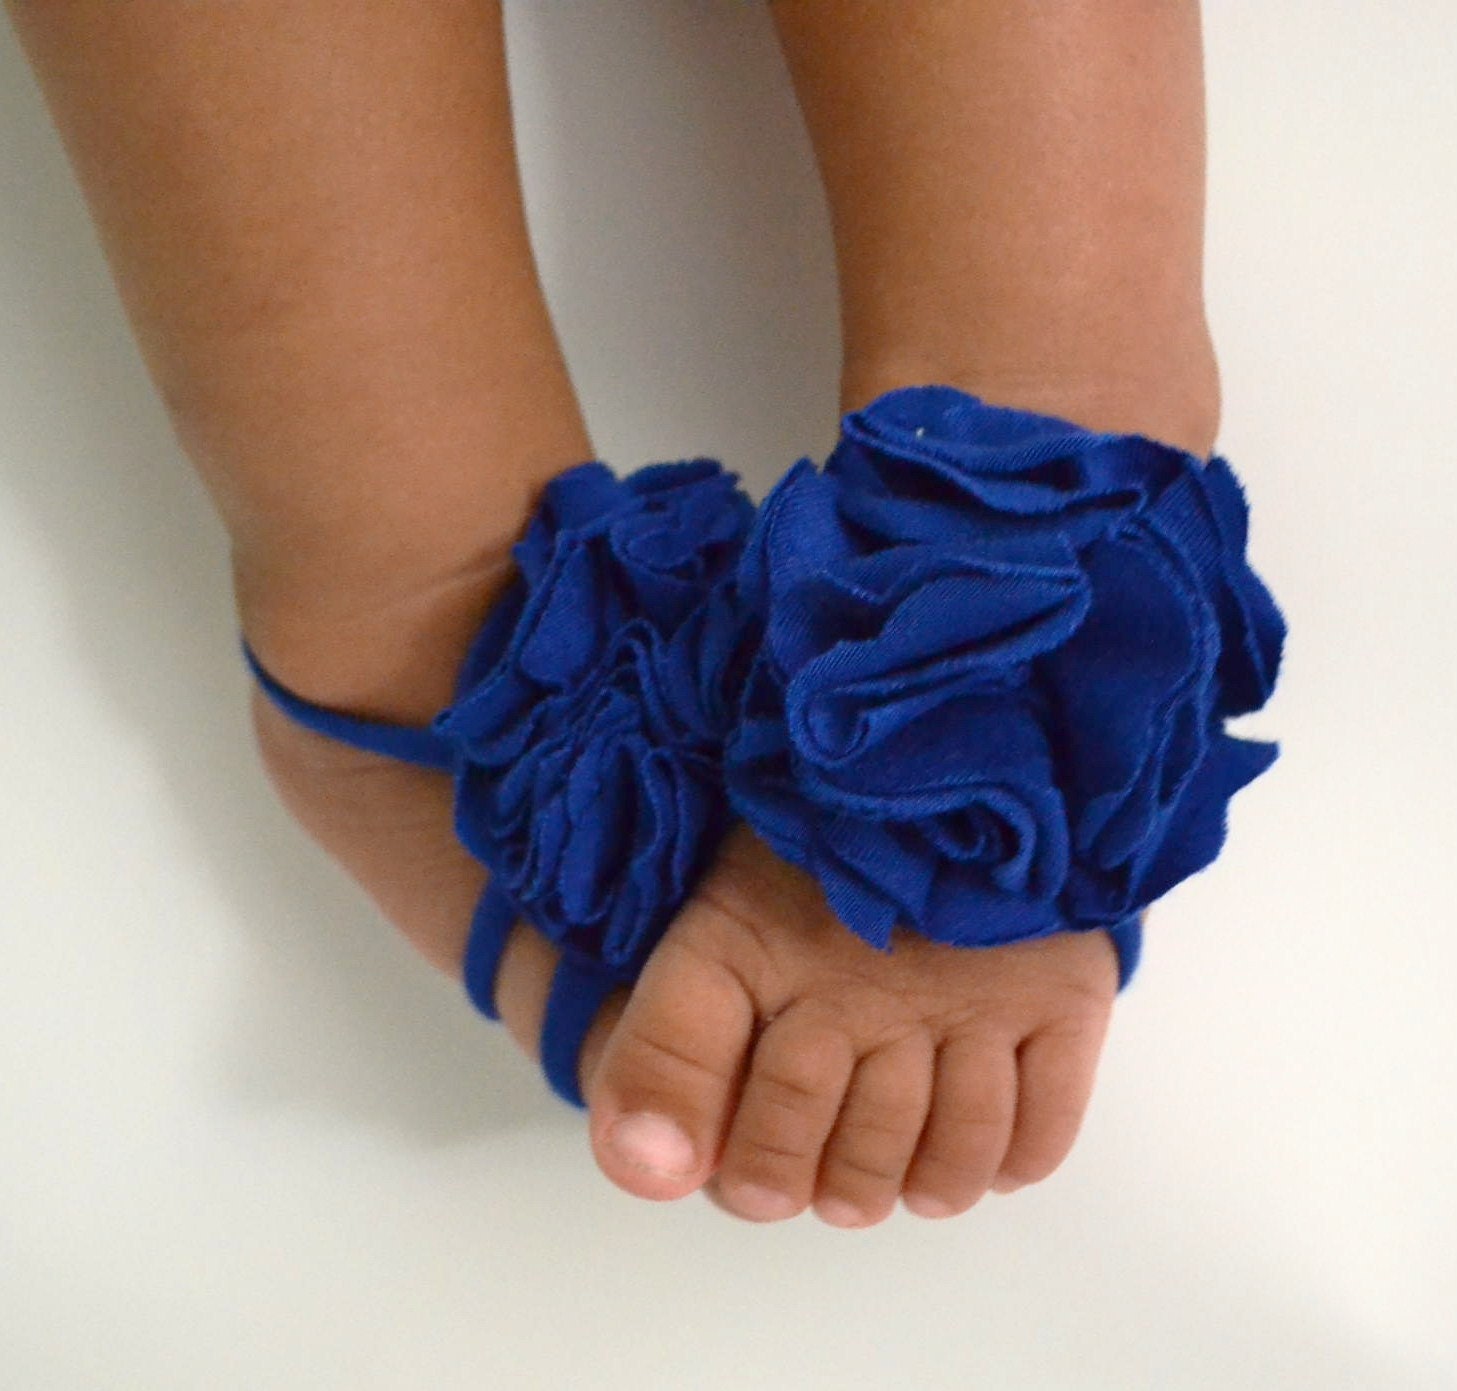 ... similar to Royal Blue Baby barefoot sandals- baby sandals on Etsy